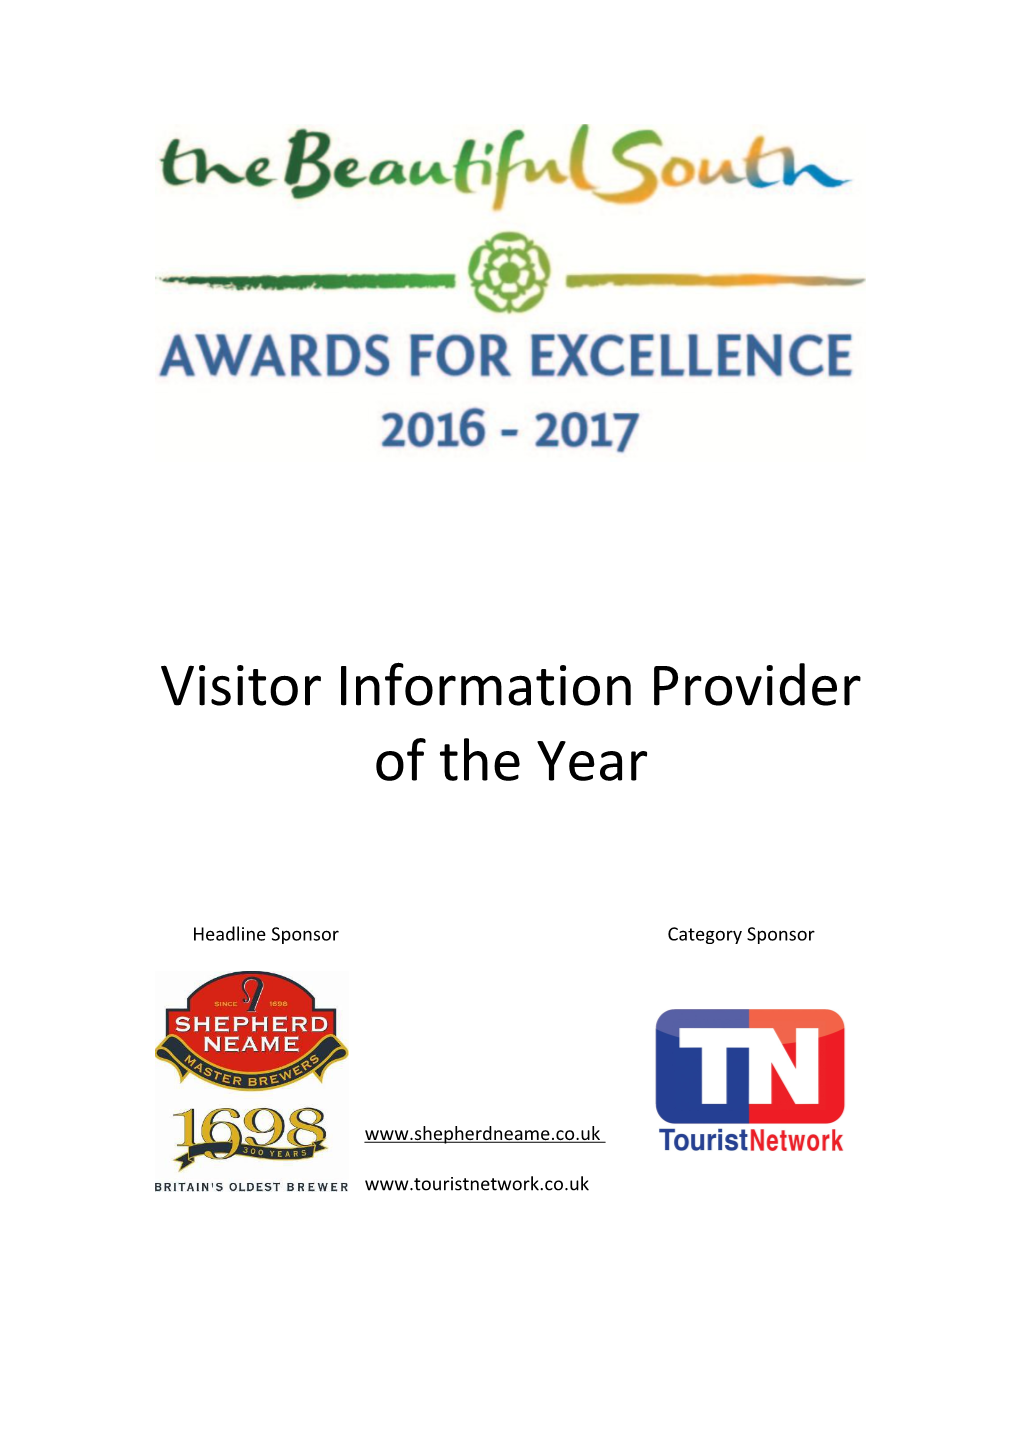 Visitor Information Provider of the Year